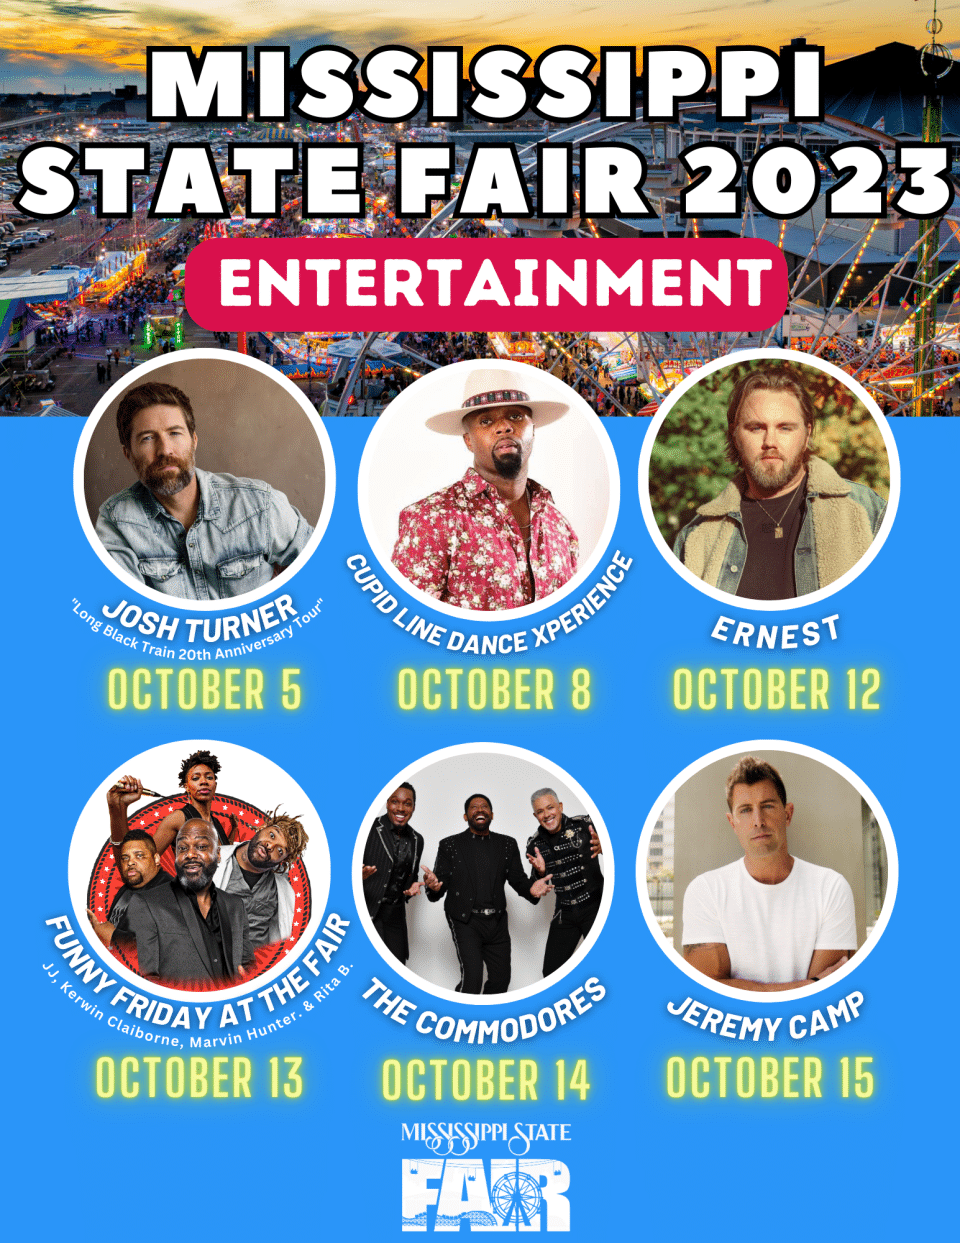 Entertainment lineup announced for 2023 Mississippi State Fair